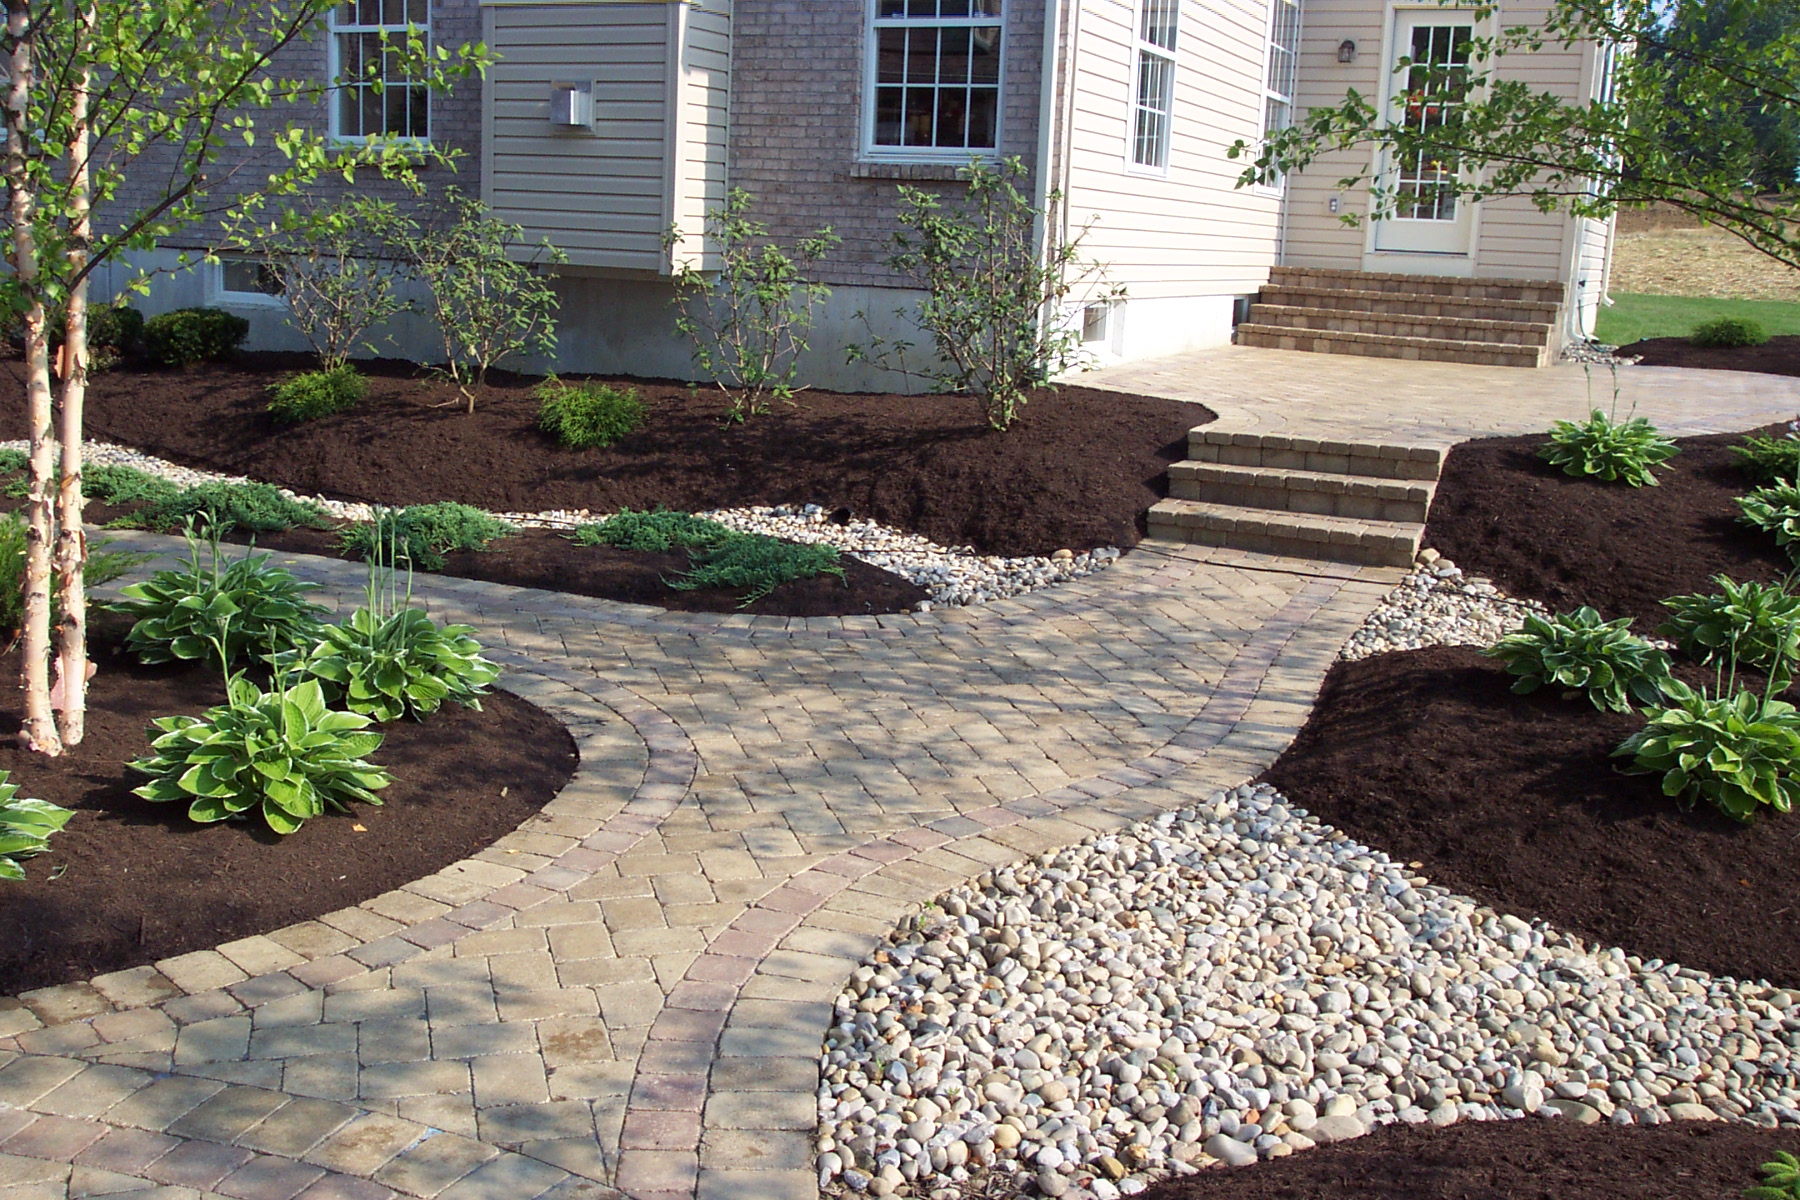 Olympic Lawns Hardscaping Services | Olympic Lawns